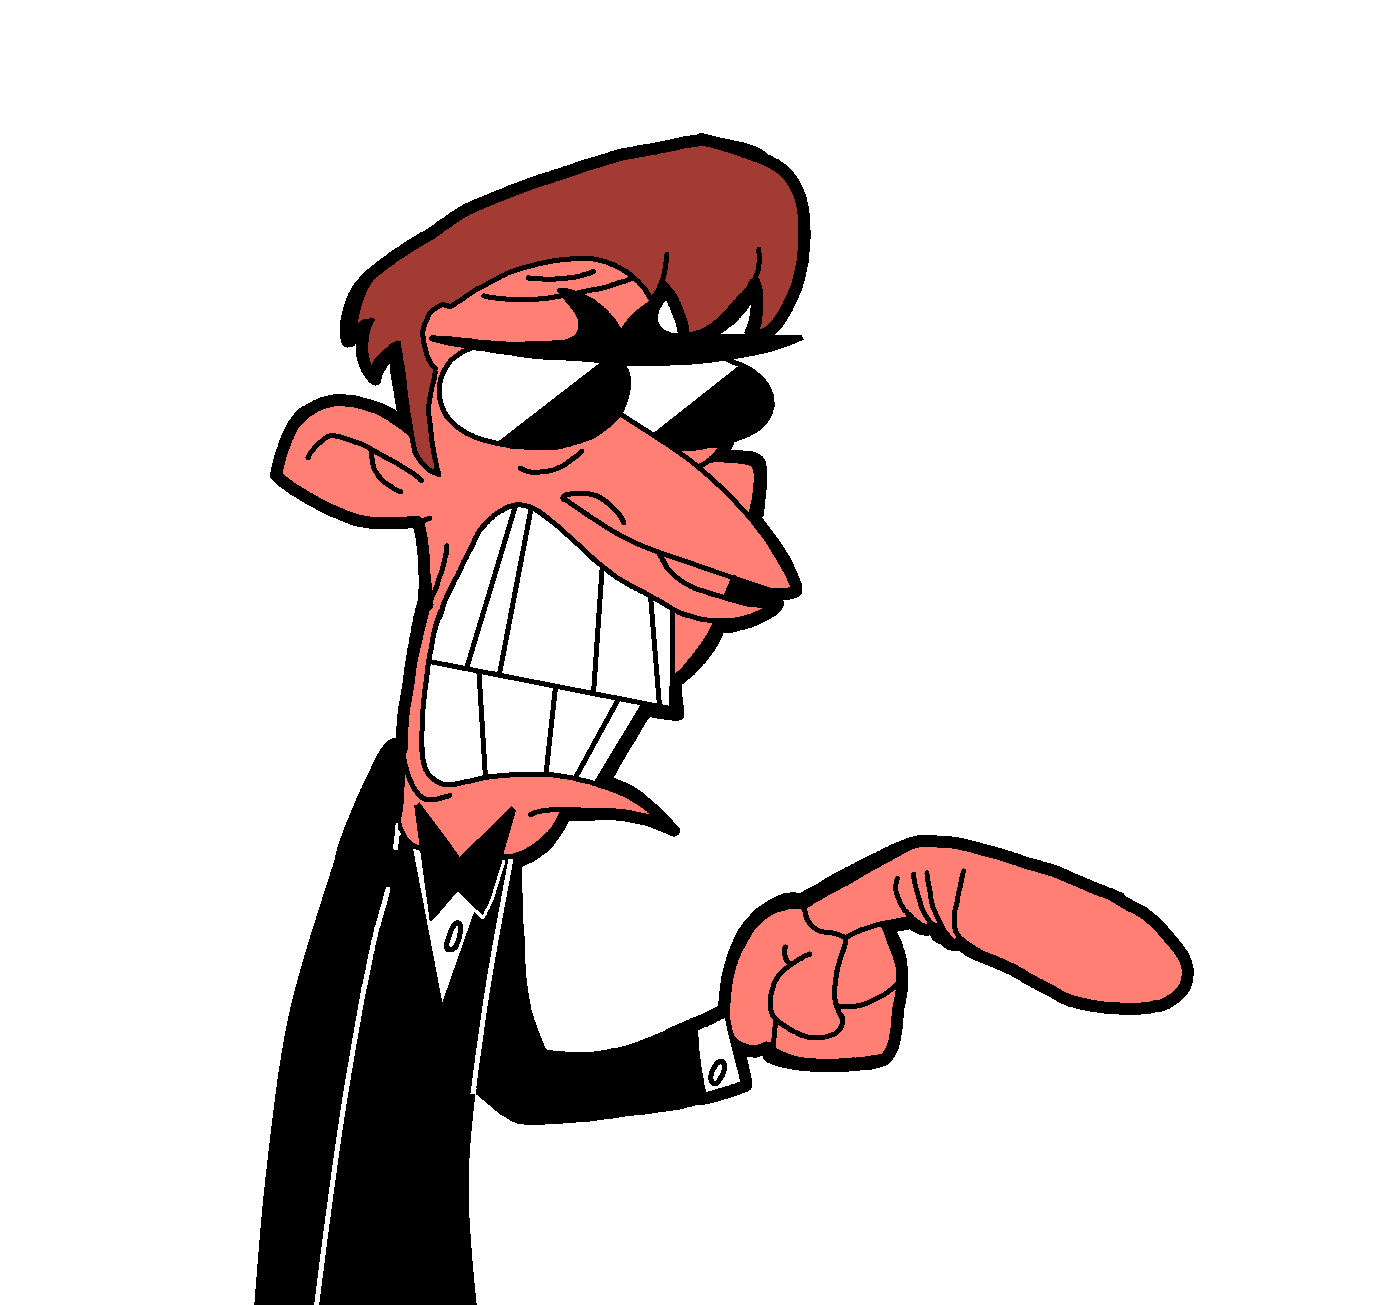 Angry man cartoon image. Mad clipart outraged